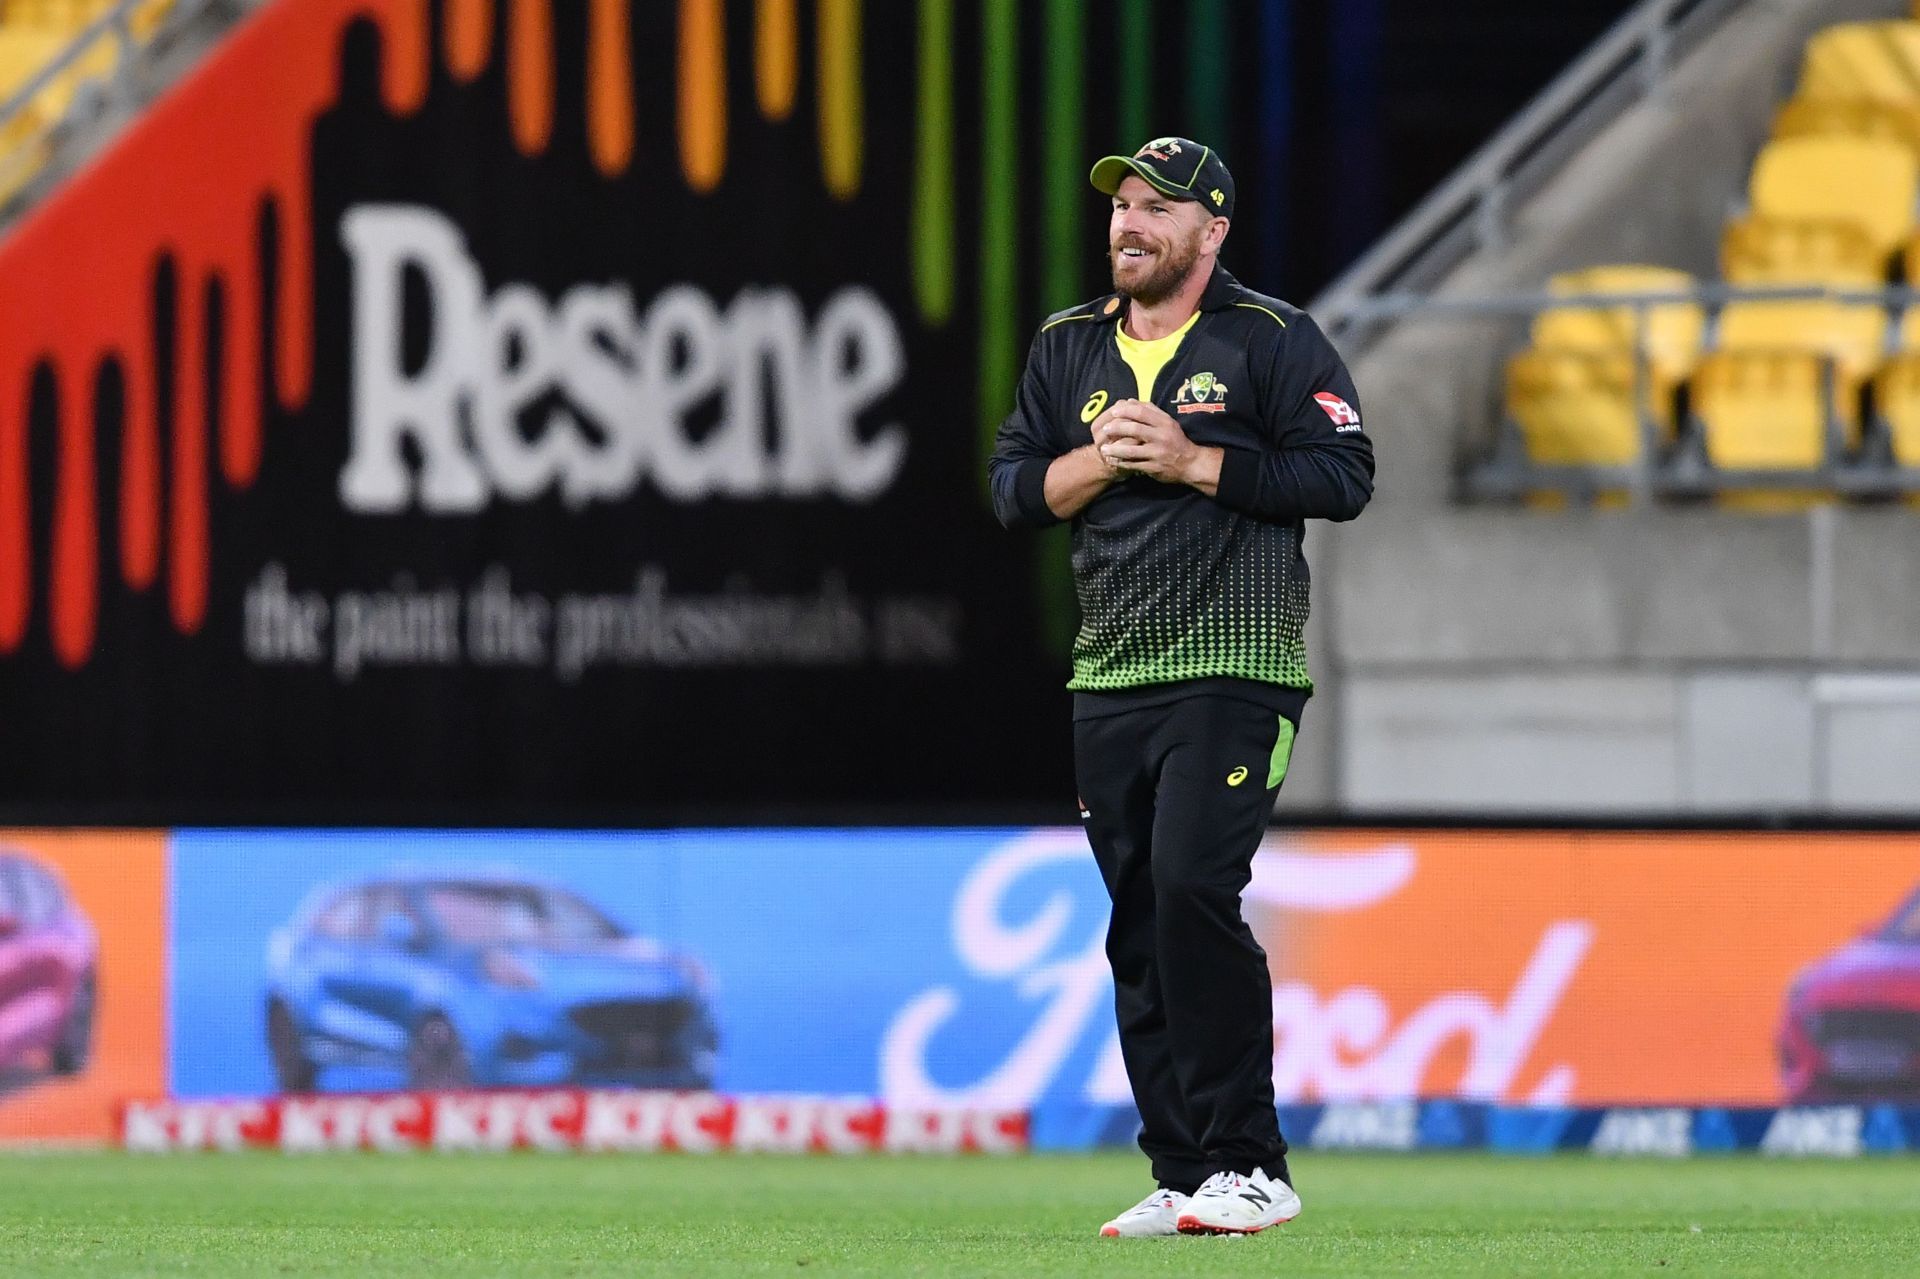 Aaron Finch is back in the team after a long break due to injury